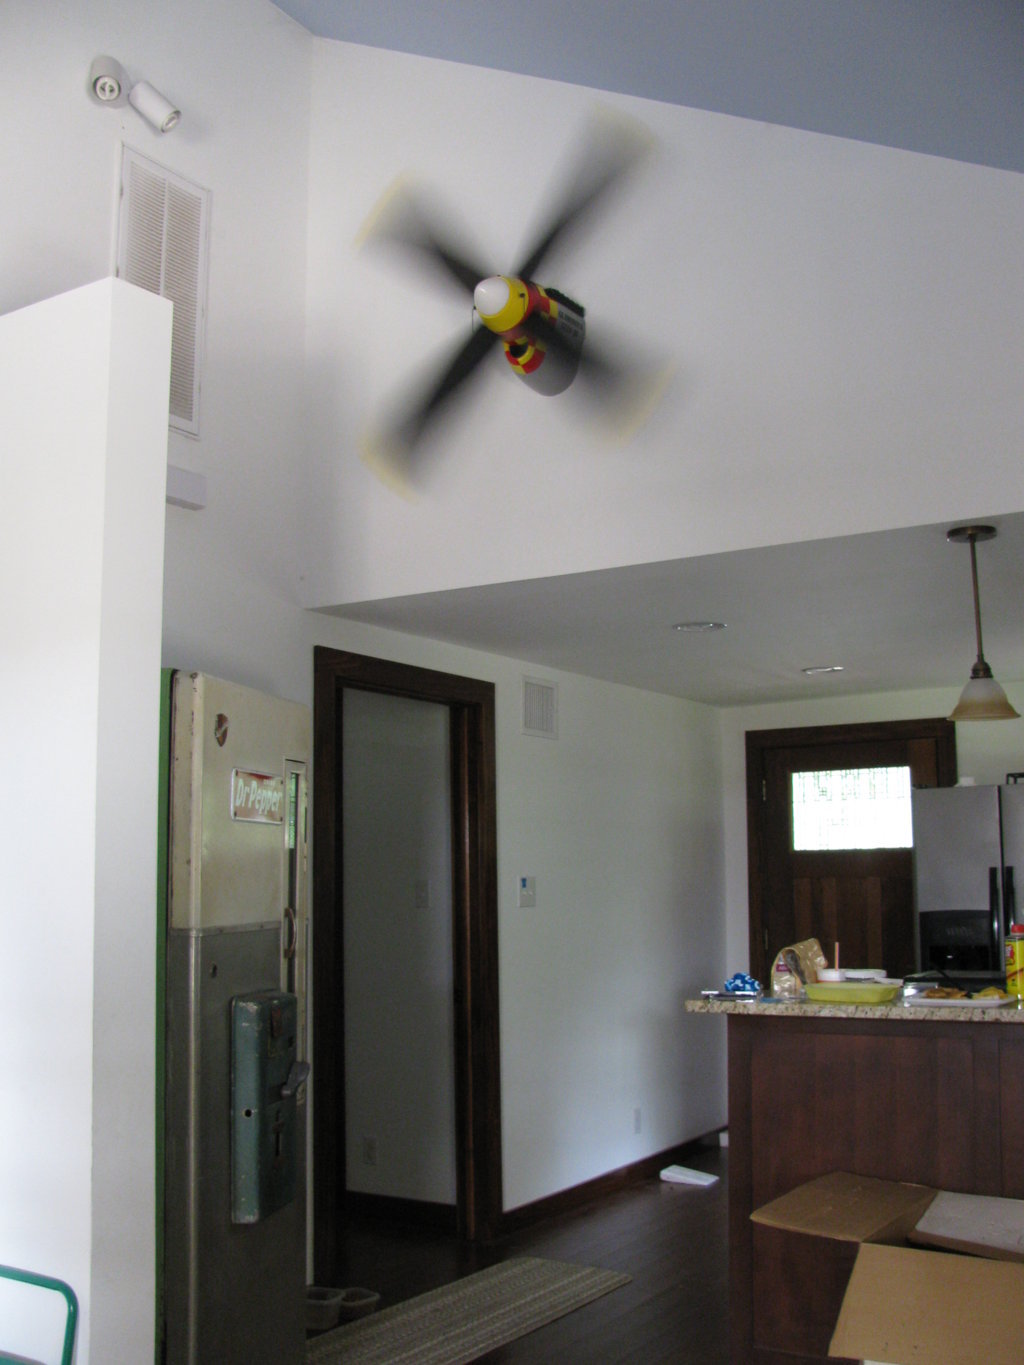 ... ceiling fan - on the wall. That's a vintage Dr.Pepper machine on the